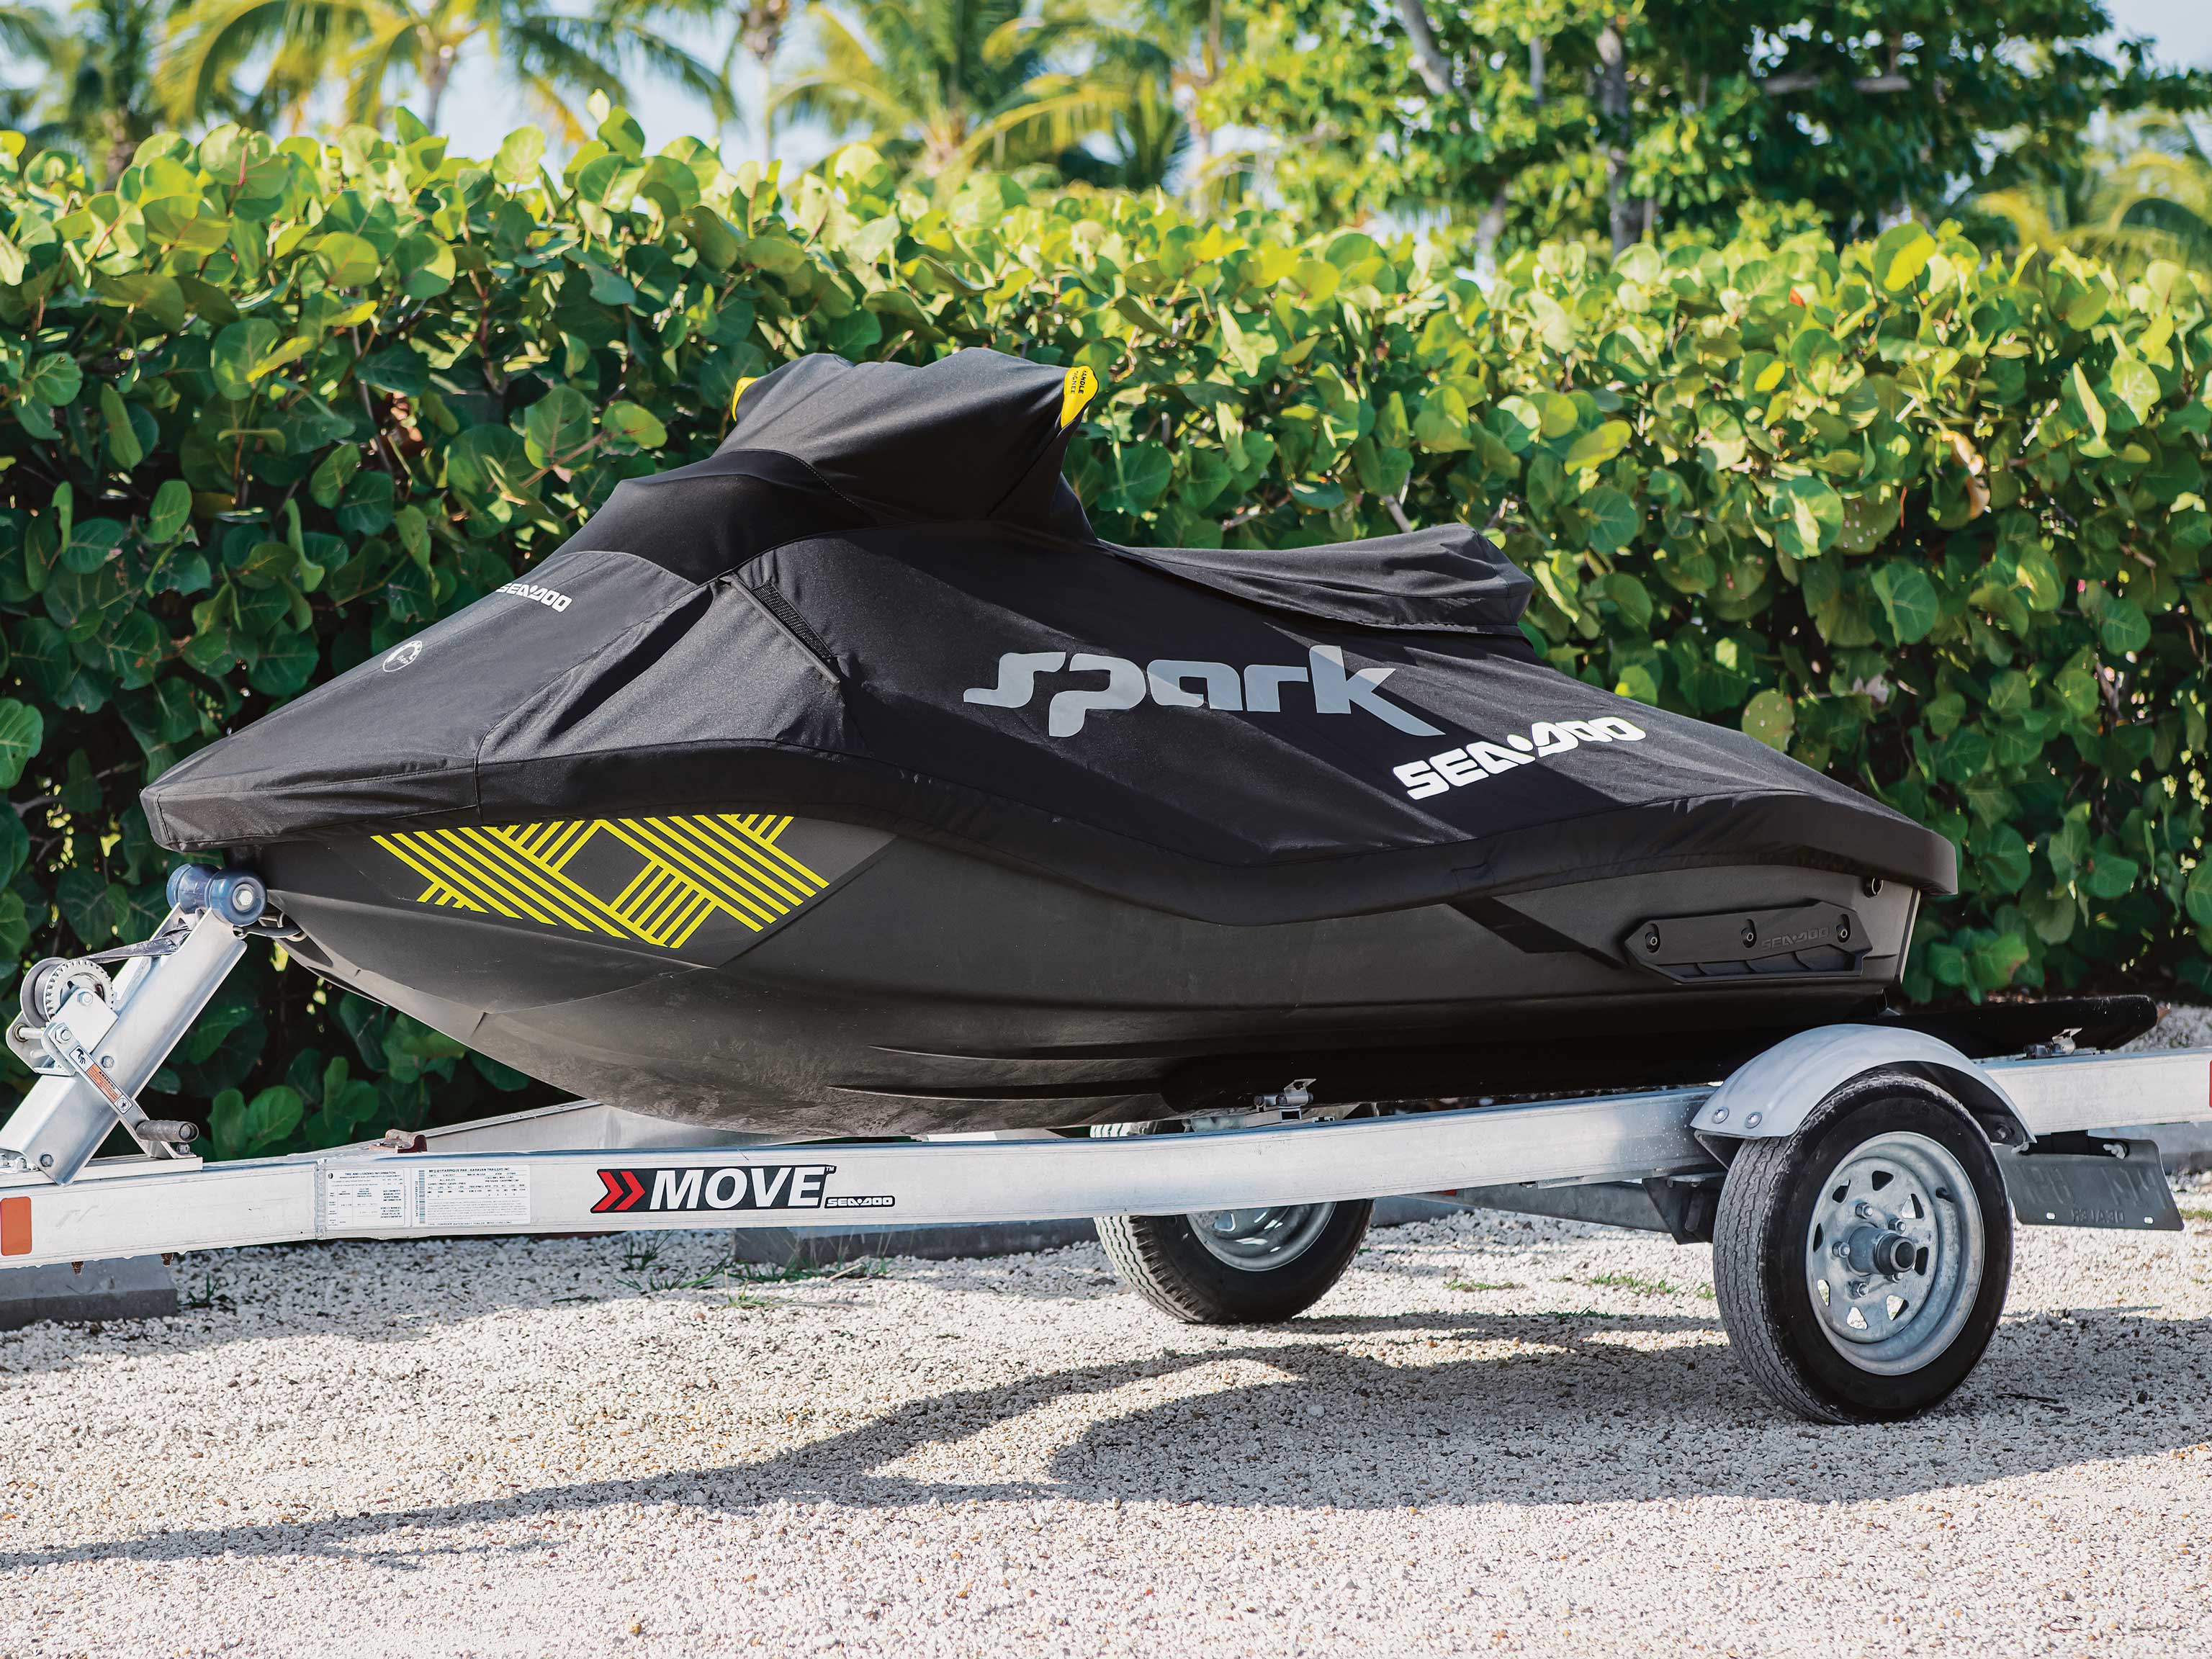 Sea-Doo covers that fit your needs